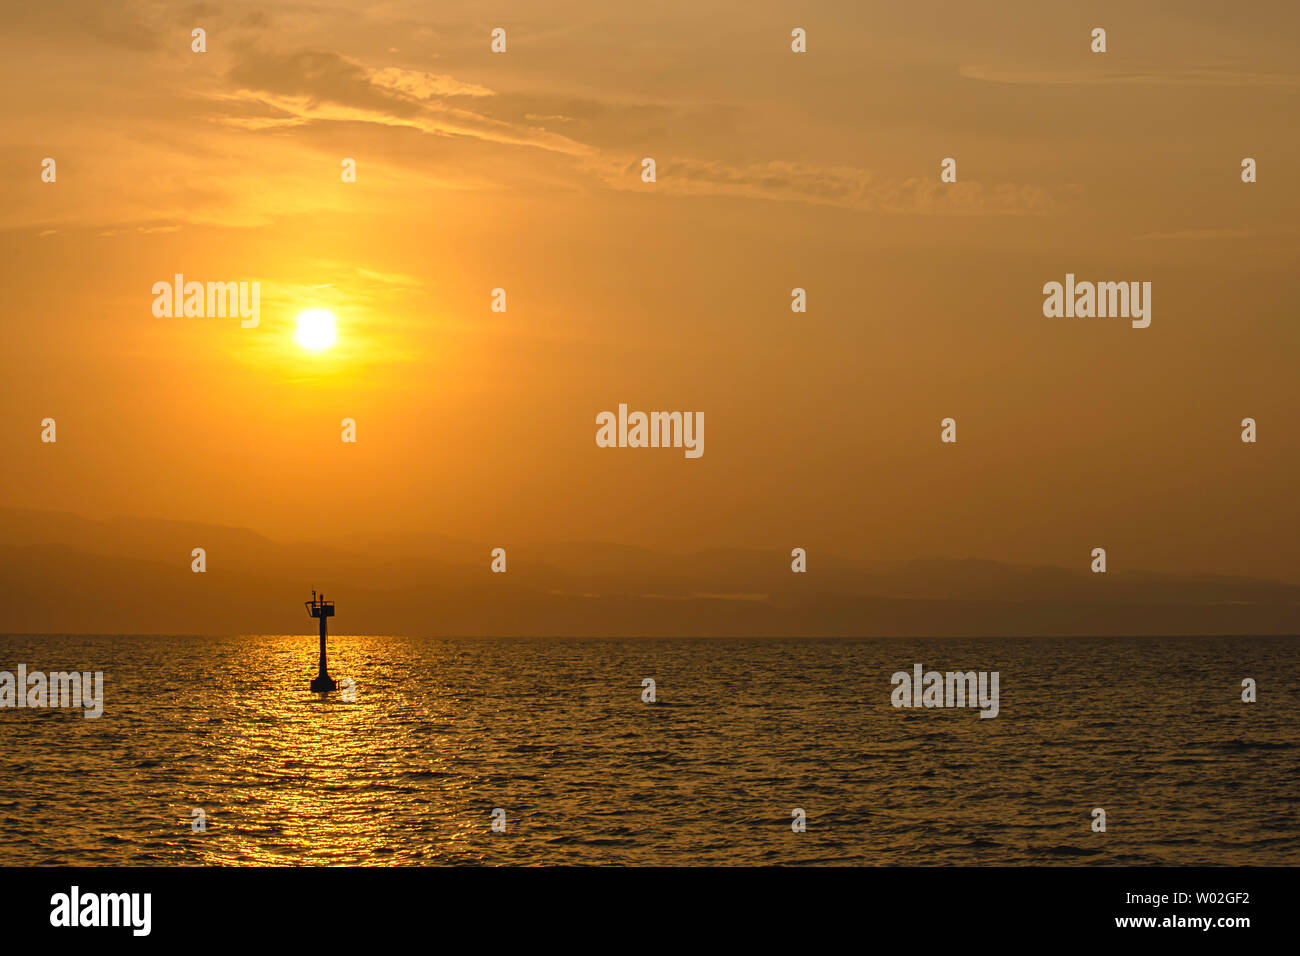 Golden light of sunrise behind the mountains and the shadow of signal lamp for sailing in the sea. Stock Photo